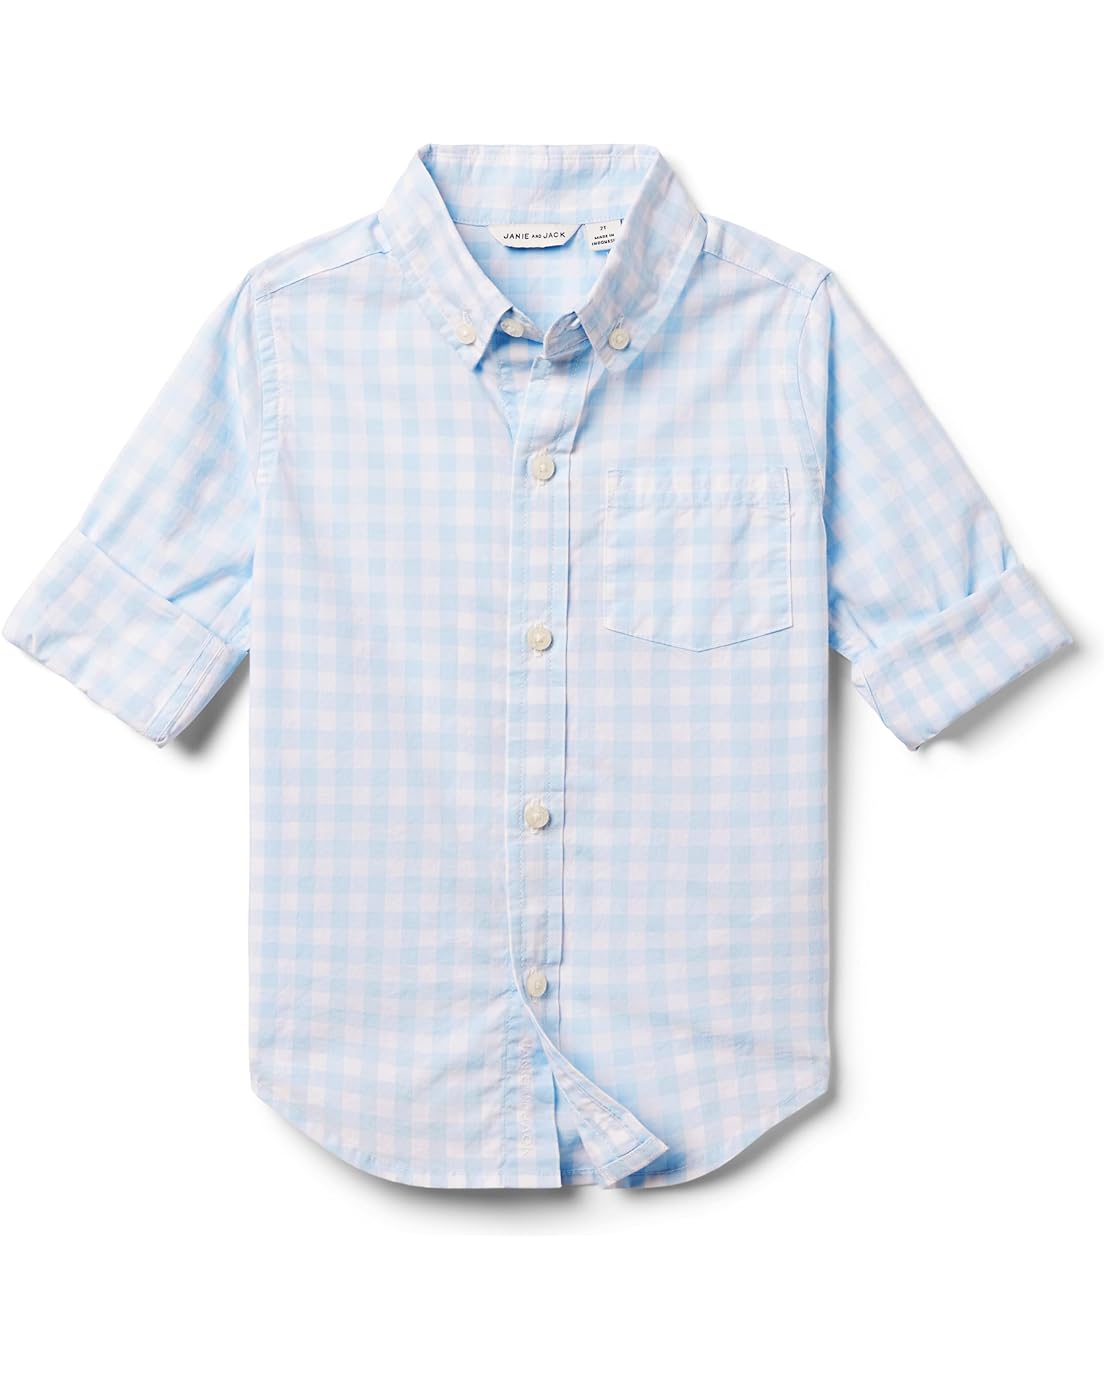 Janie and Jack Gingham Roll Up Shirt (Toddler/Little Kids/Big Kids)